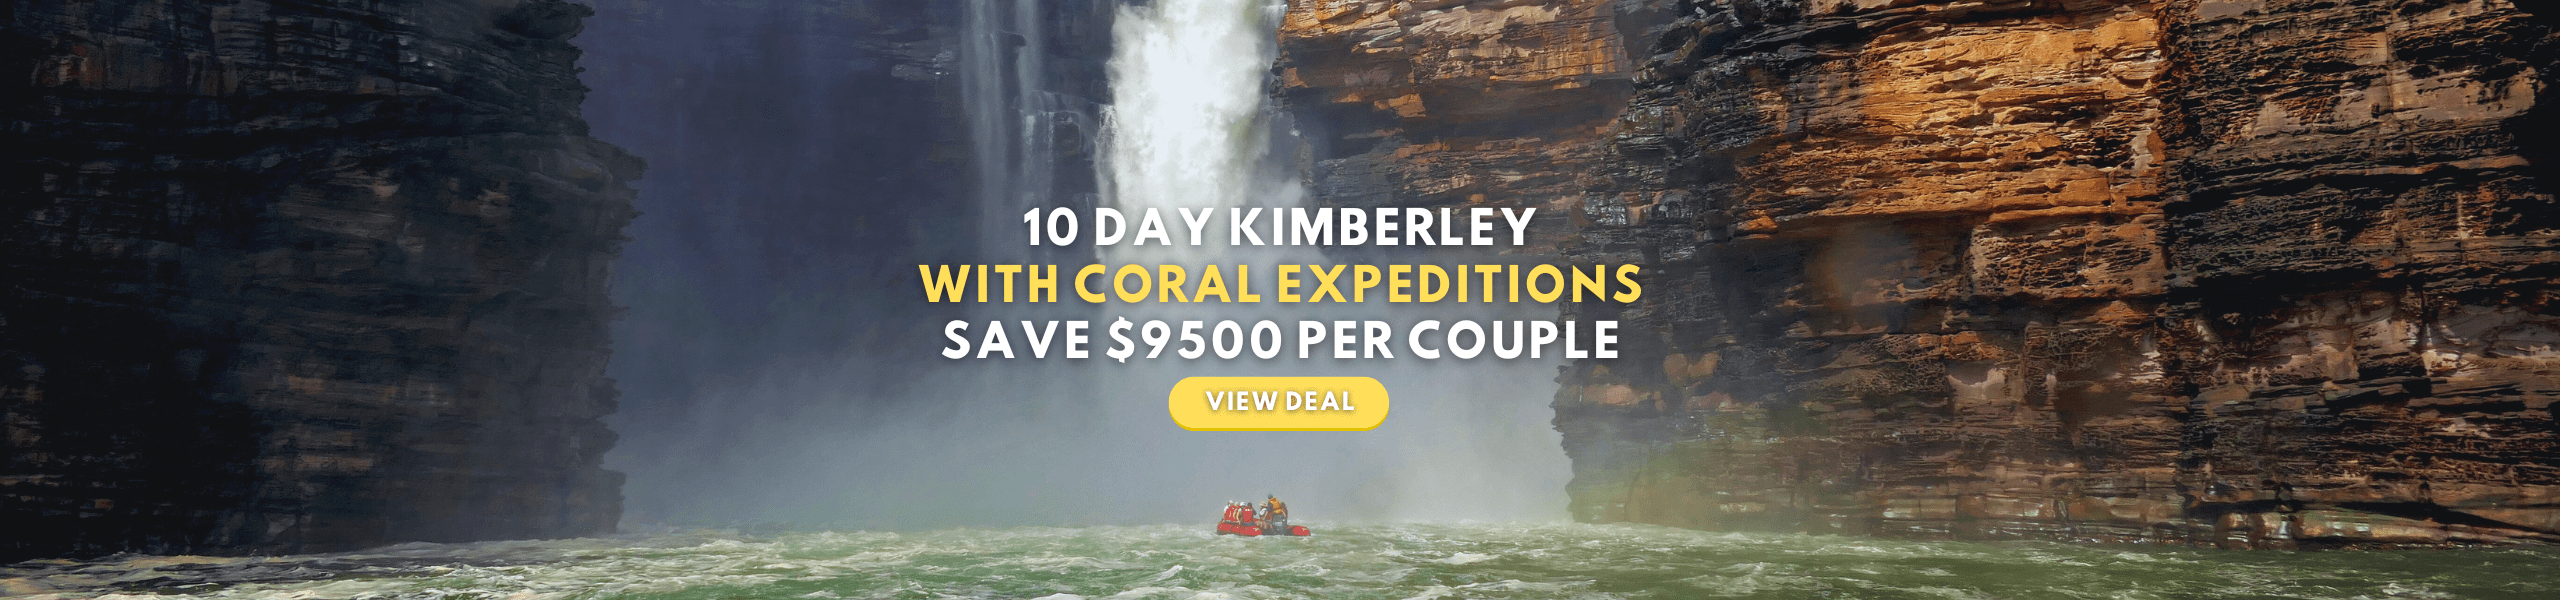 Discover The Kimberley With Coral Expeditions